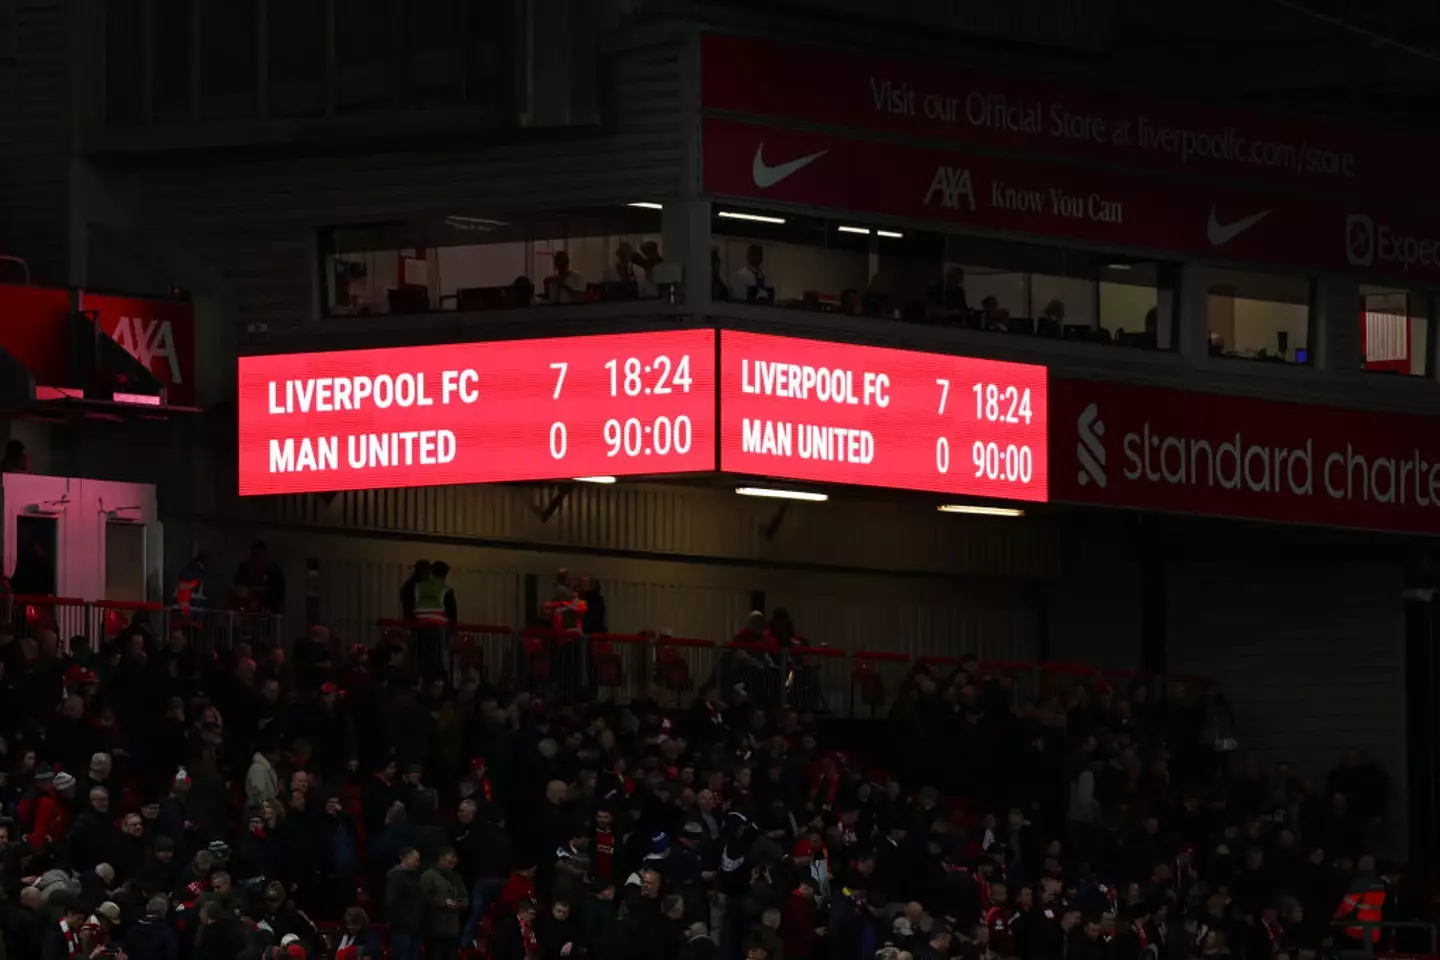 United were humiliated by Liverpool at Anfield last season (Image: Getty)